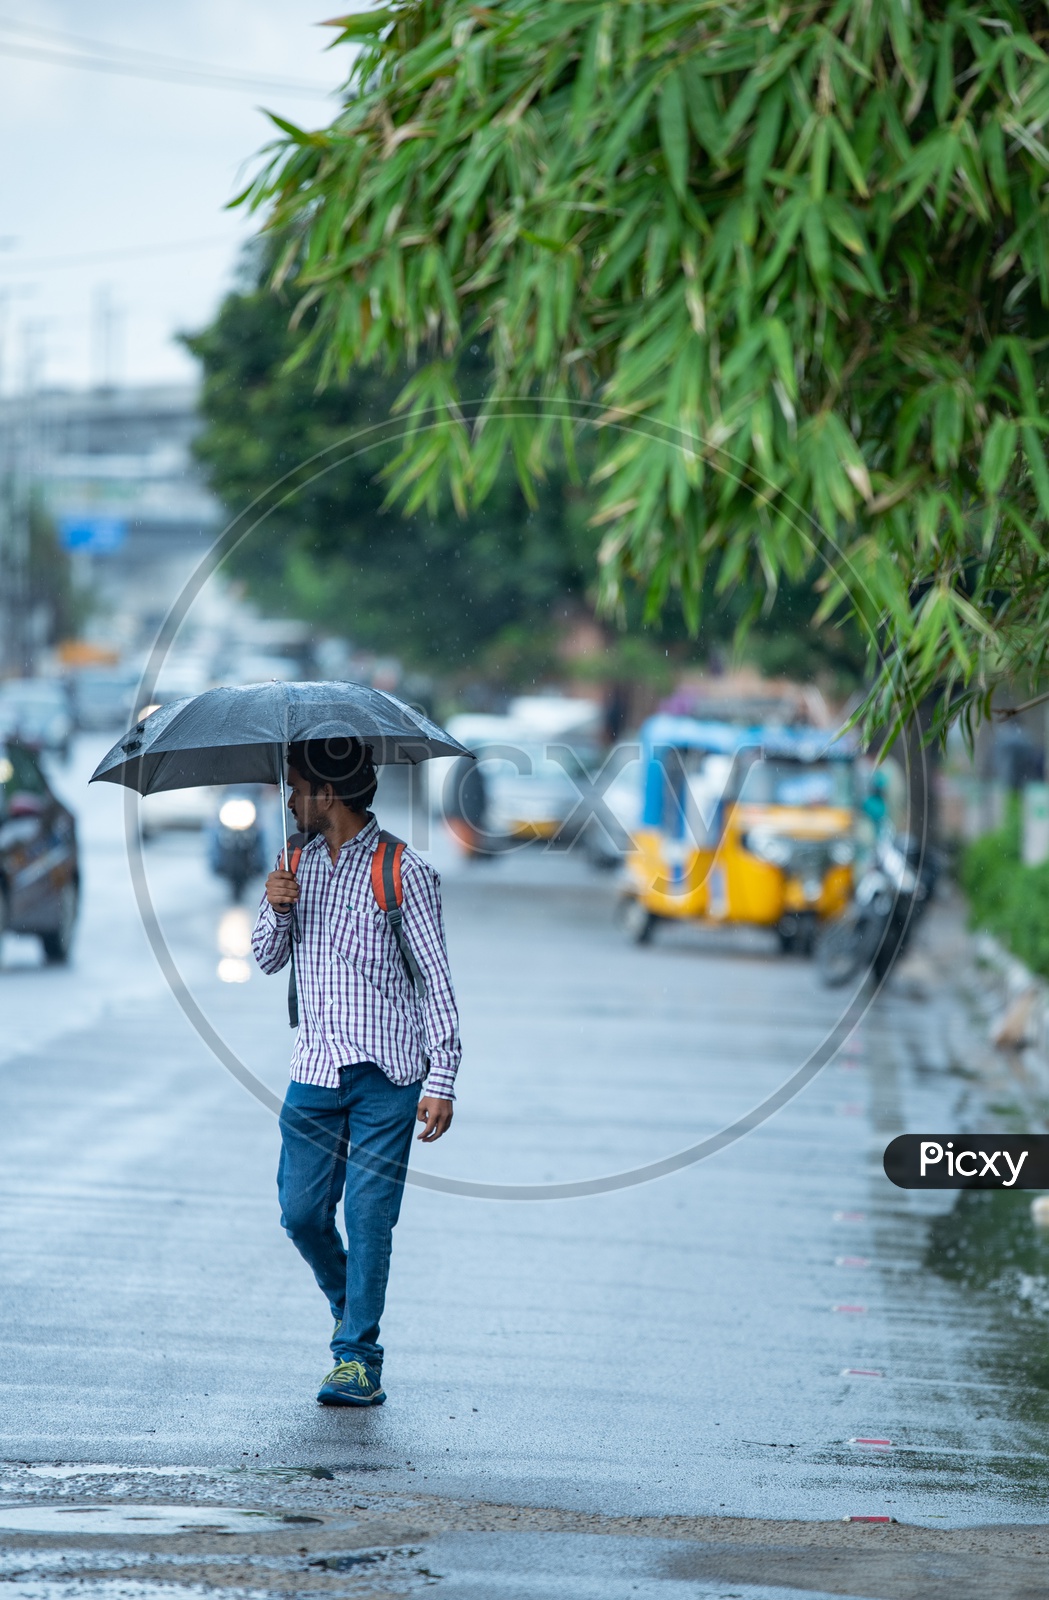 Pedestrains Taking Shiled From Monsoon Drizzle with Umbrellas on Hi-tech City Roads